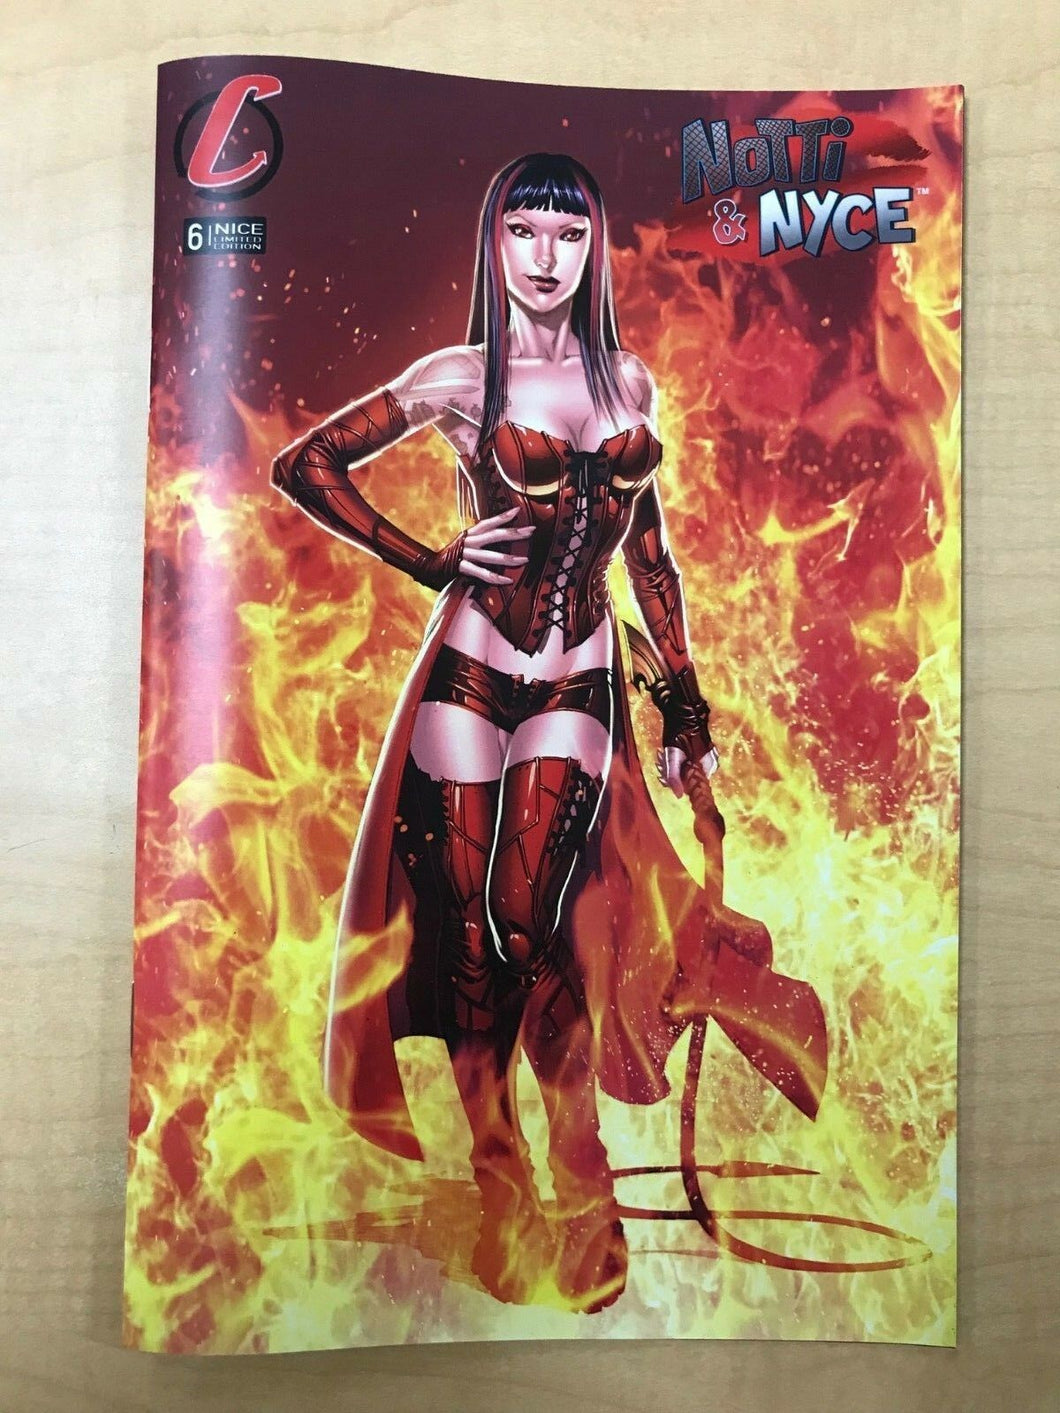 Notti & Nyce #6 NICE Variant Cover by Jose Varese Counterpoint Entertainment